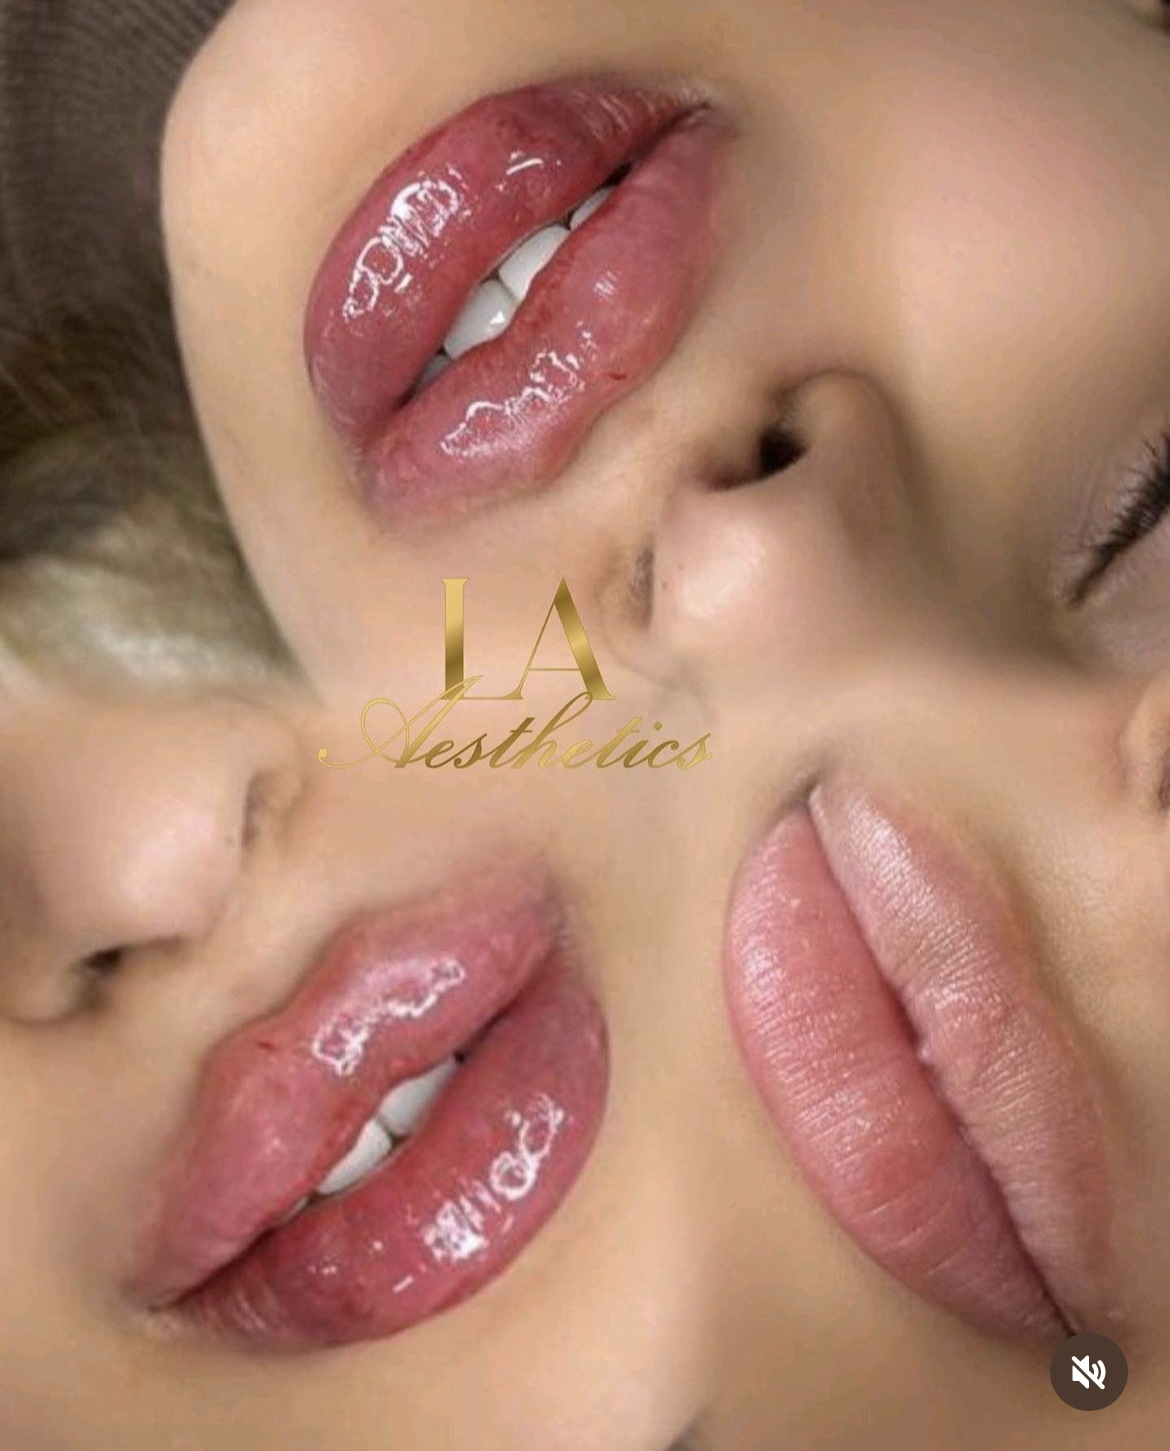 LA Aesthetics | Aesthetic Clinic & Cosmetic Courses In London gallery image 7